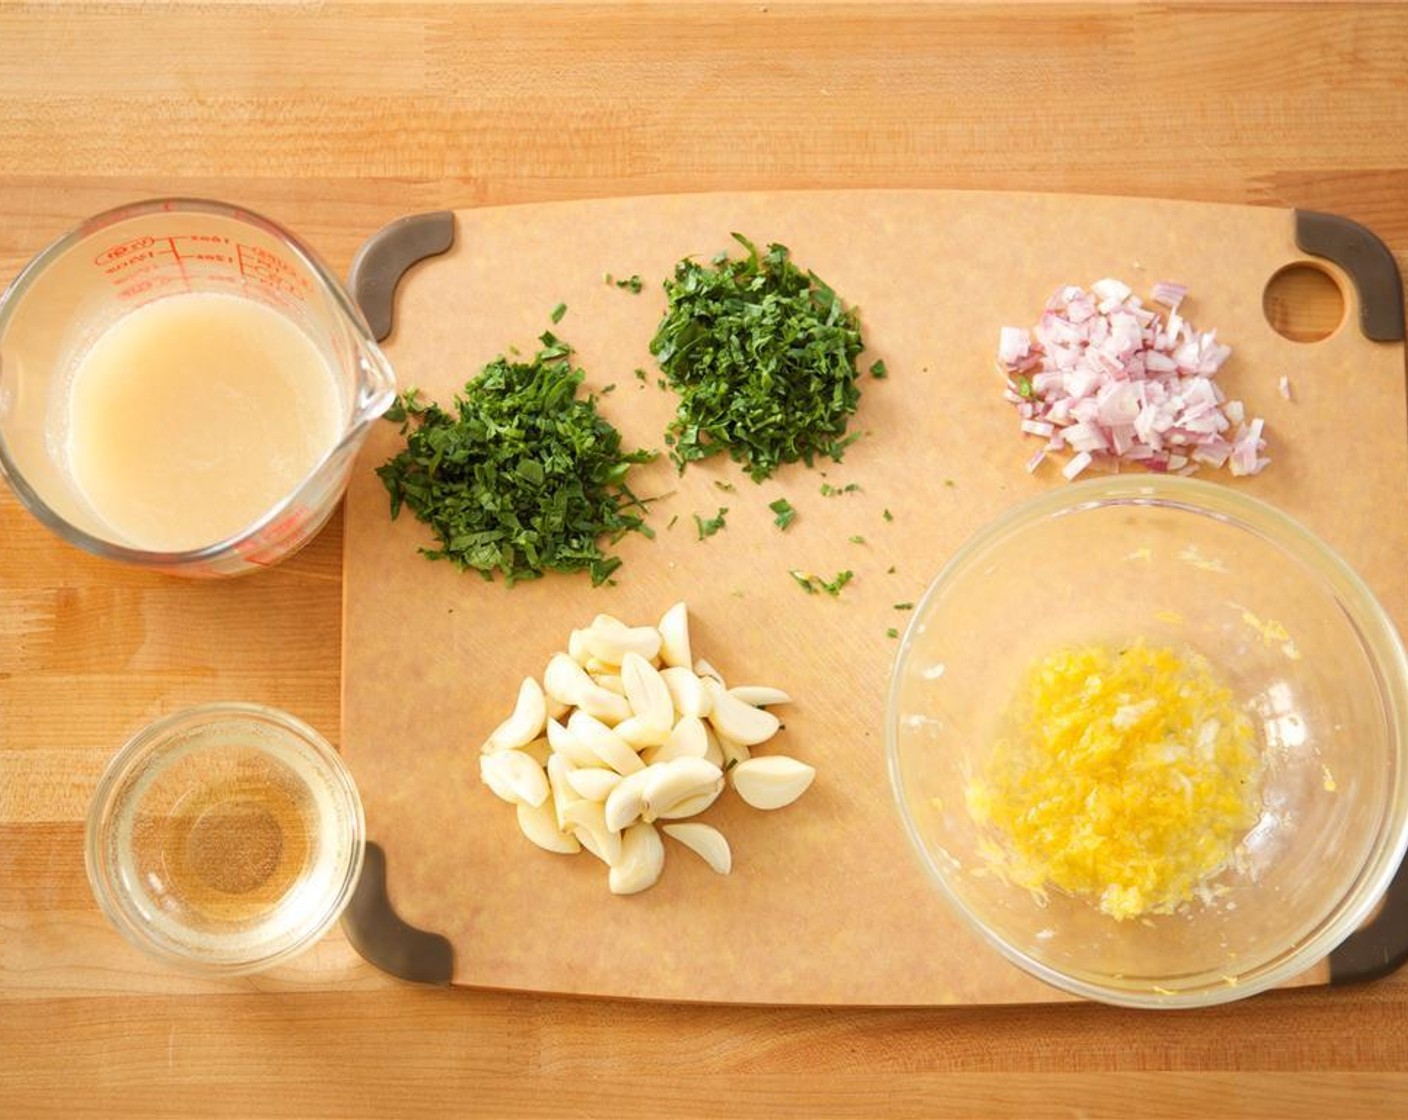 step 2 In a bowl, stir Chicken Base (1 pckg) with 1 cup of warm water. Slice the Garlic (20 cloves) in half lengthwise. Finely chop the Shallot (1). Finely chop Fresh Parsley (3 Tbsp), into a bowl. Juice Lemon (1) into the bowl with zest.